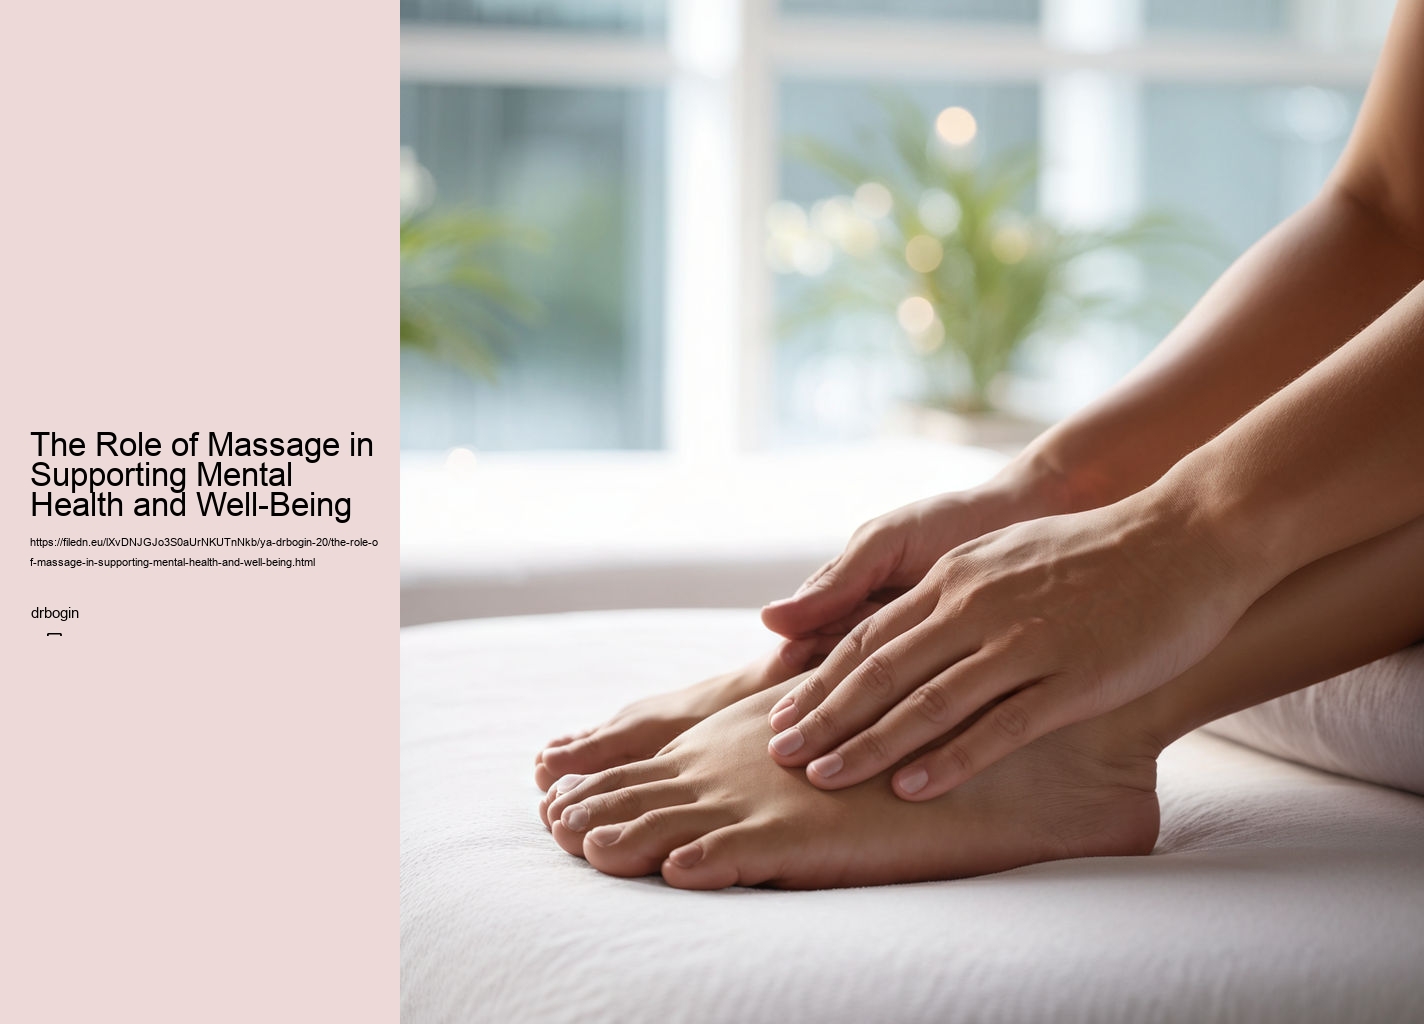 The Role of Massage in Supporting Mental Health and Well-Being